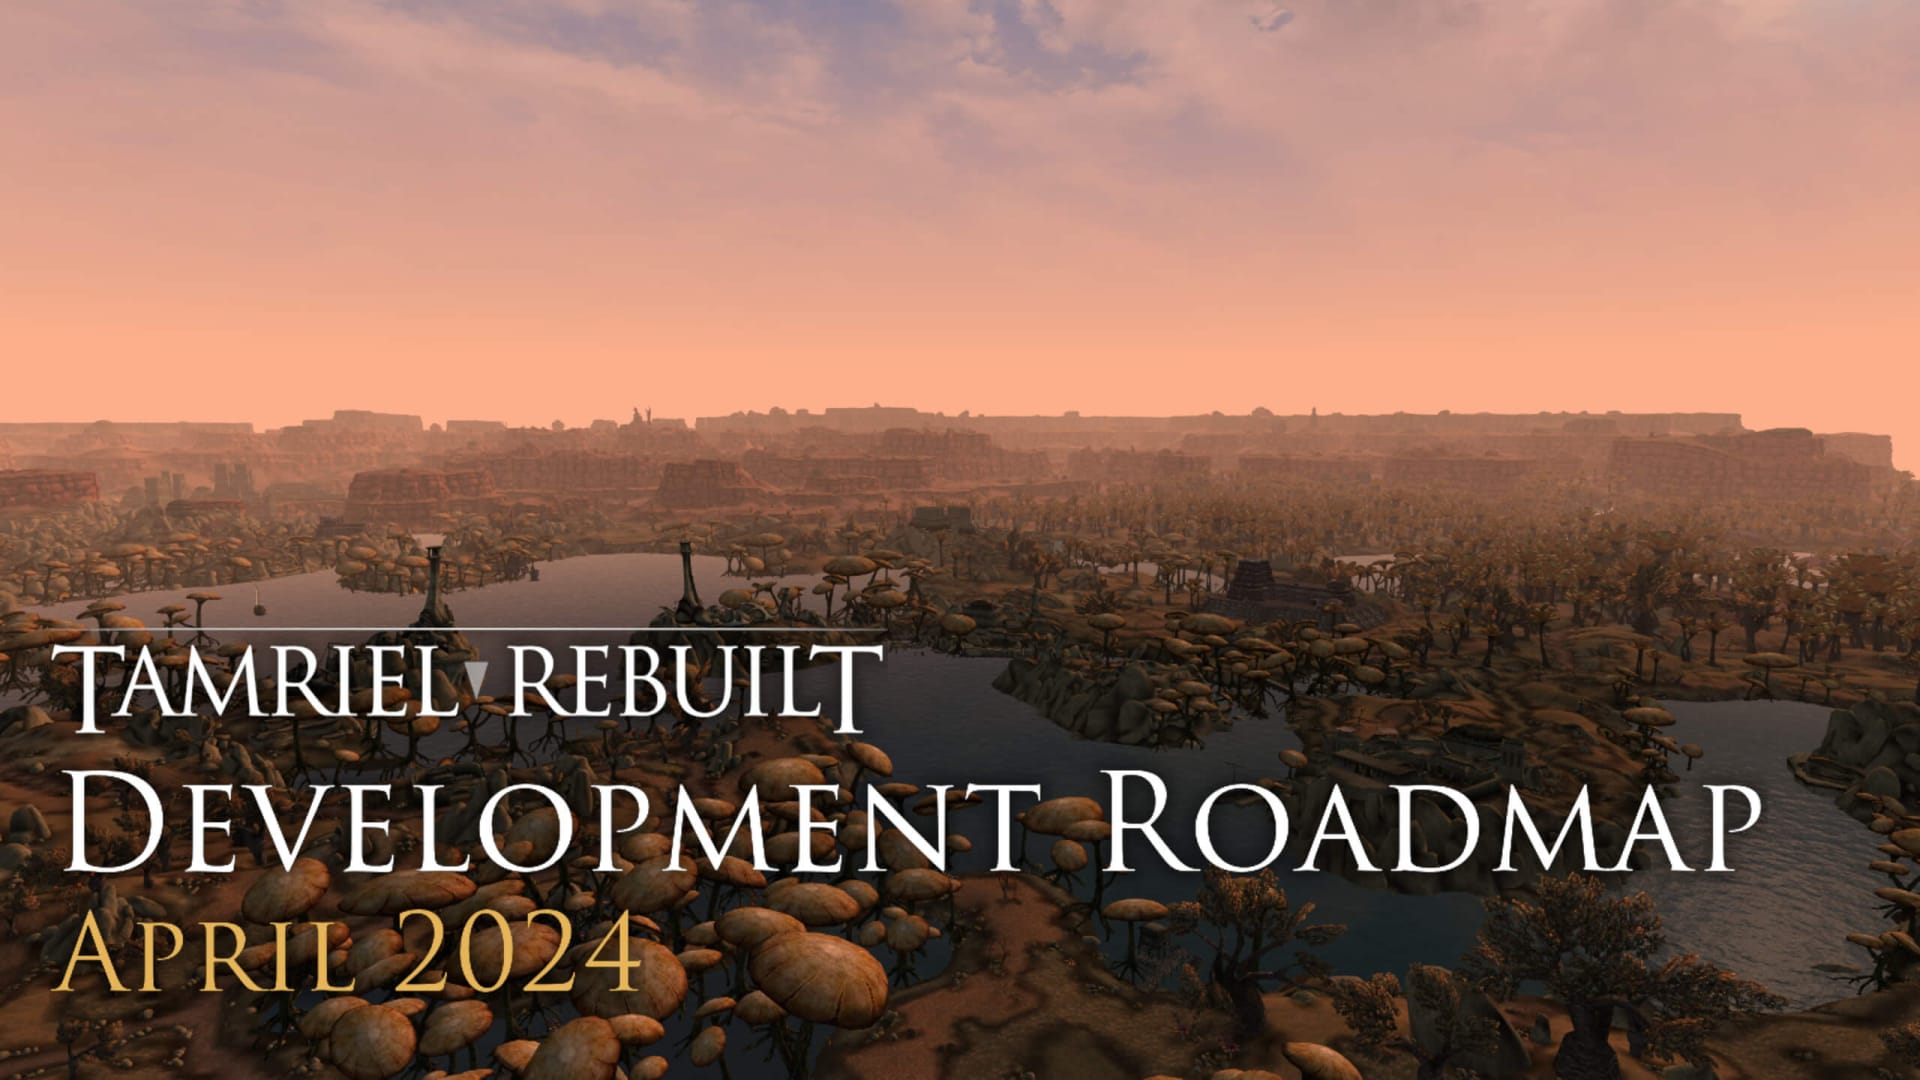 A Morrowind landscape with the text "Tamriel Rebuilt Development Roadmap 2024" in front of it